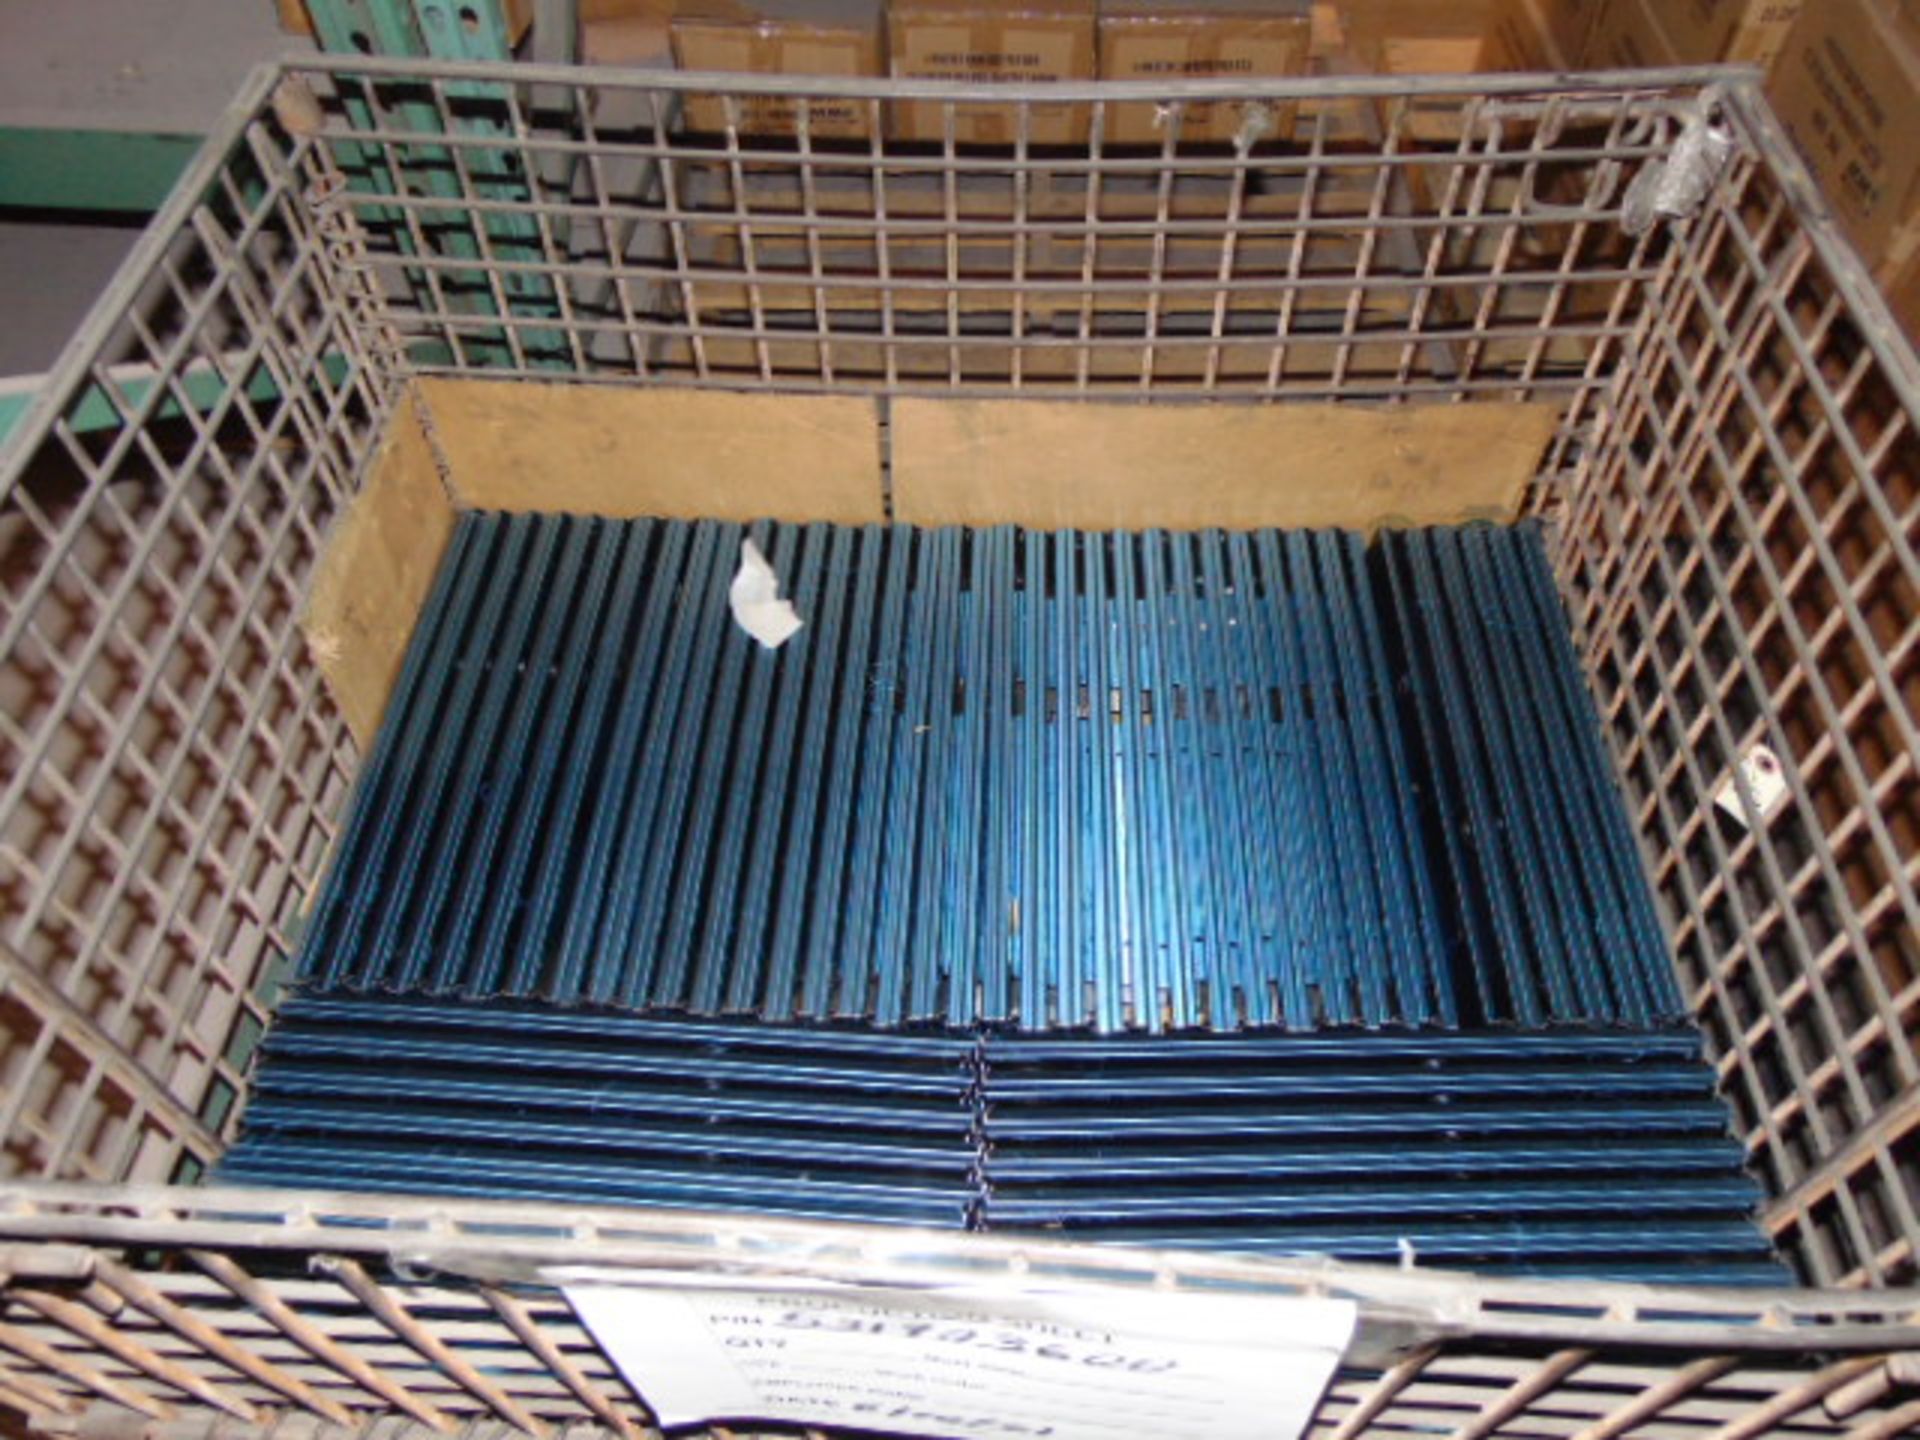 LOT CONTENTS OF PALLET RACKING SECTIONS (23) : steel parts, 3 x 5 followers, plastic hooks, - Image 30 of 43